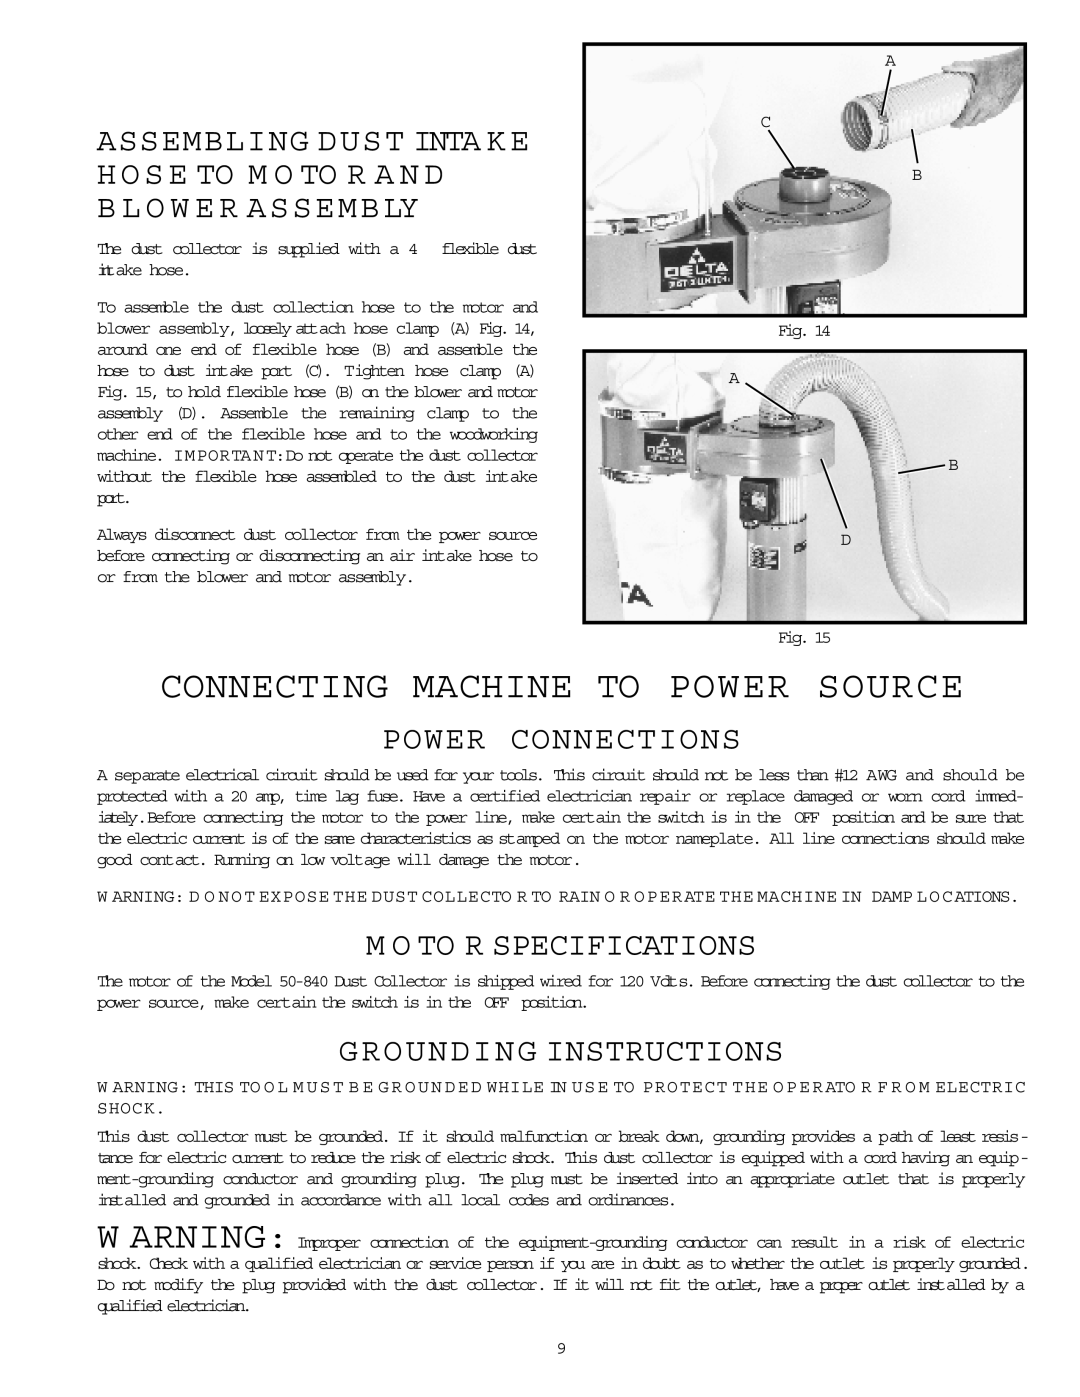 Delta 50-840 Connecting Machine To Power Source, B L O W E R Assembly, Power Connections, M O To R Specifications 